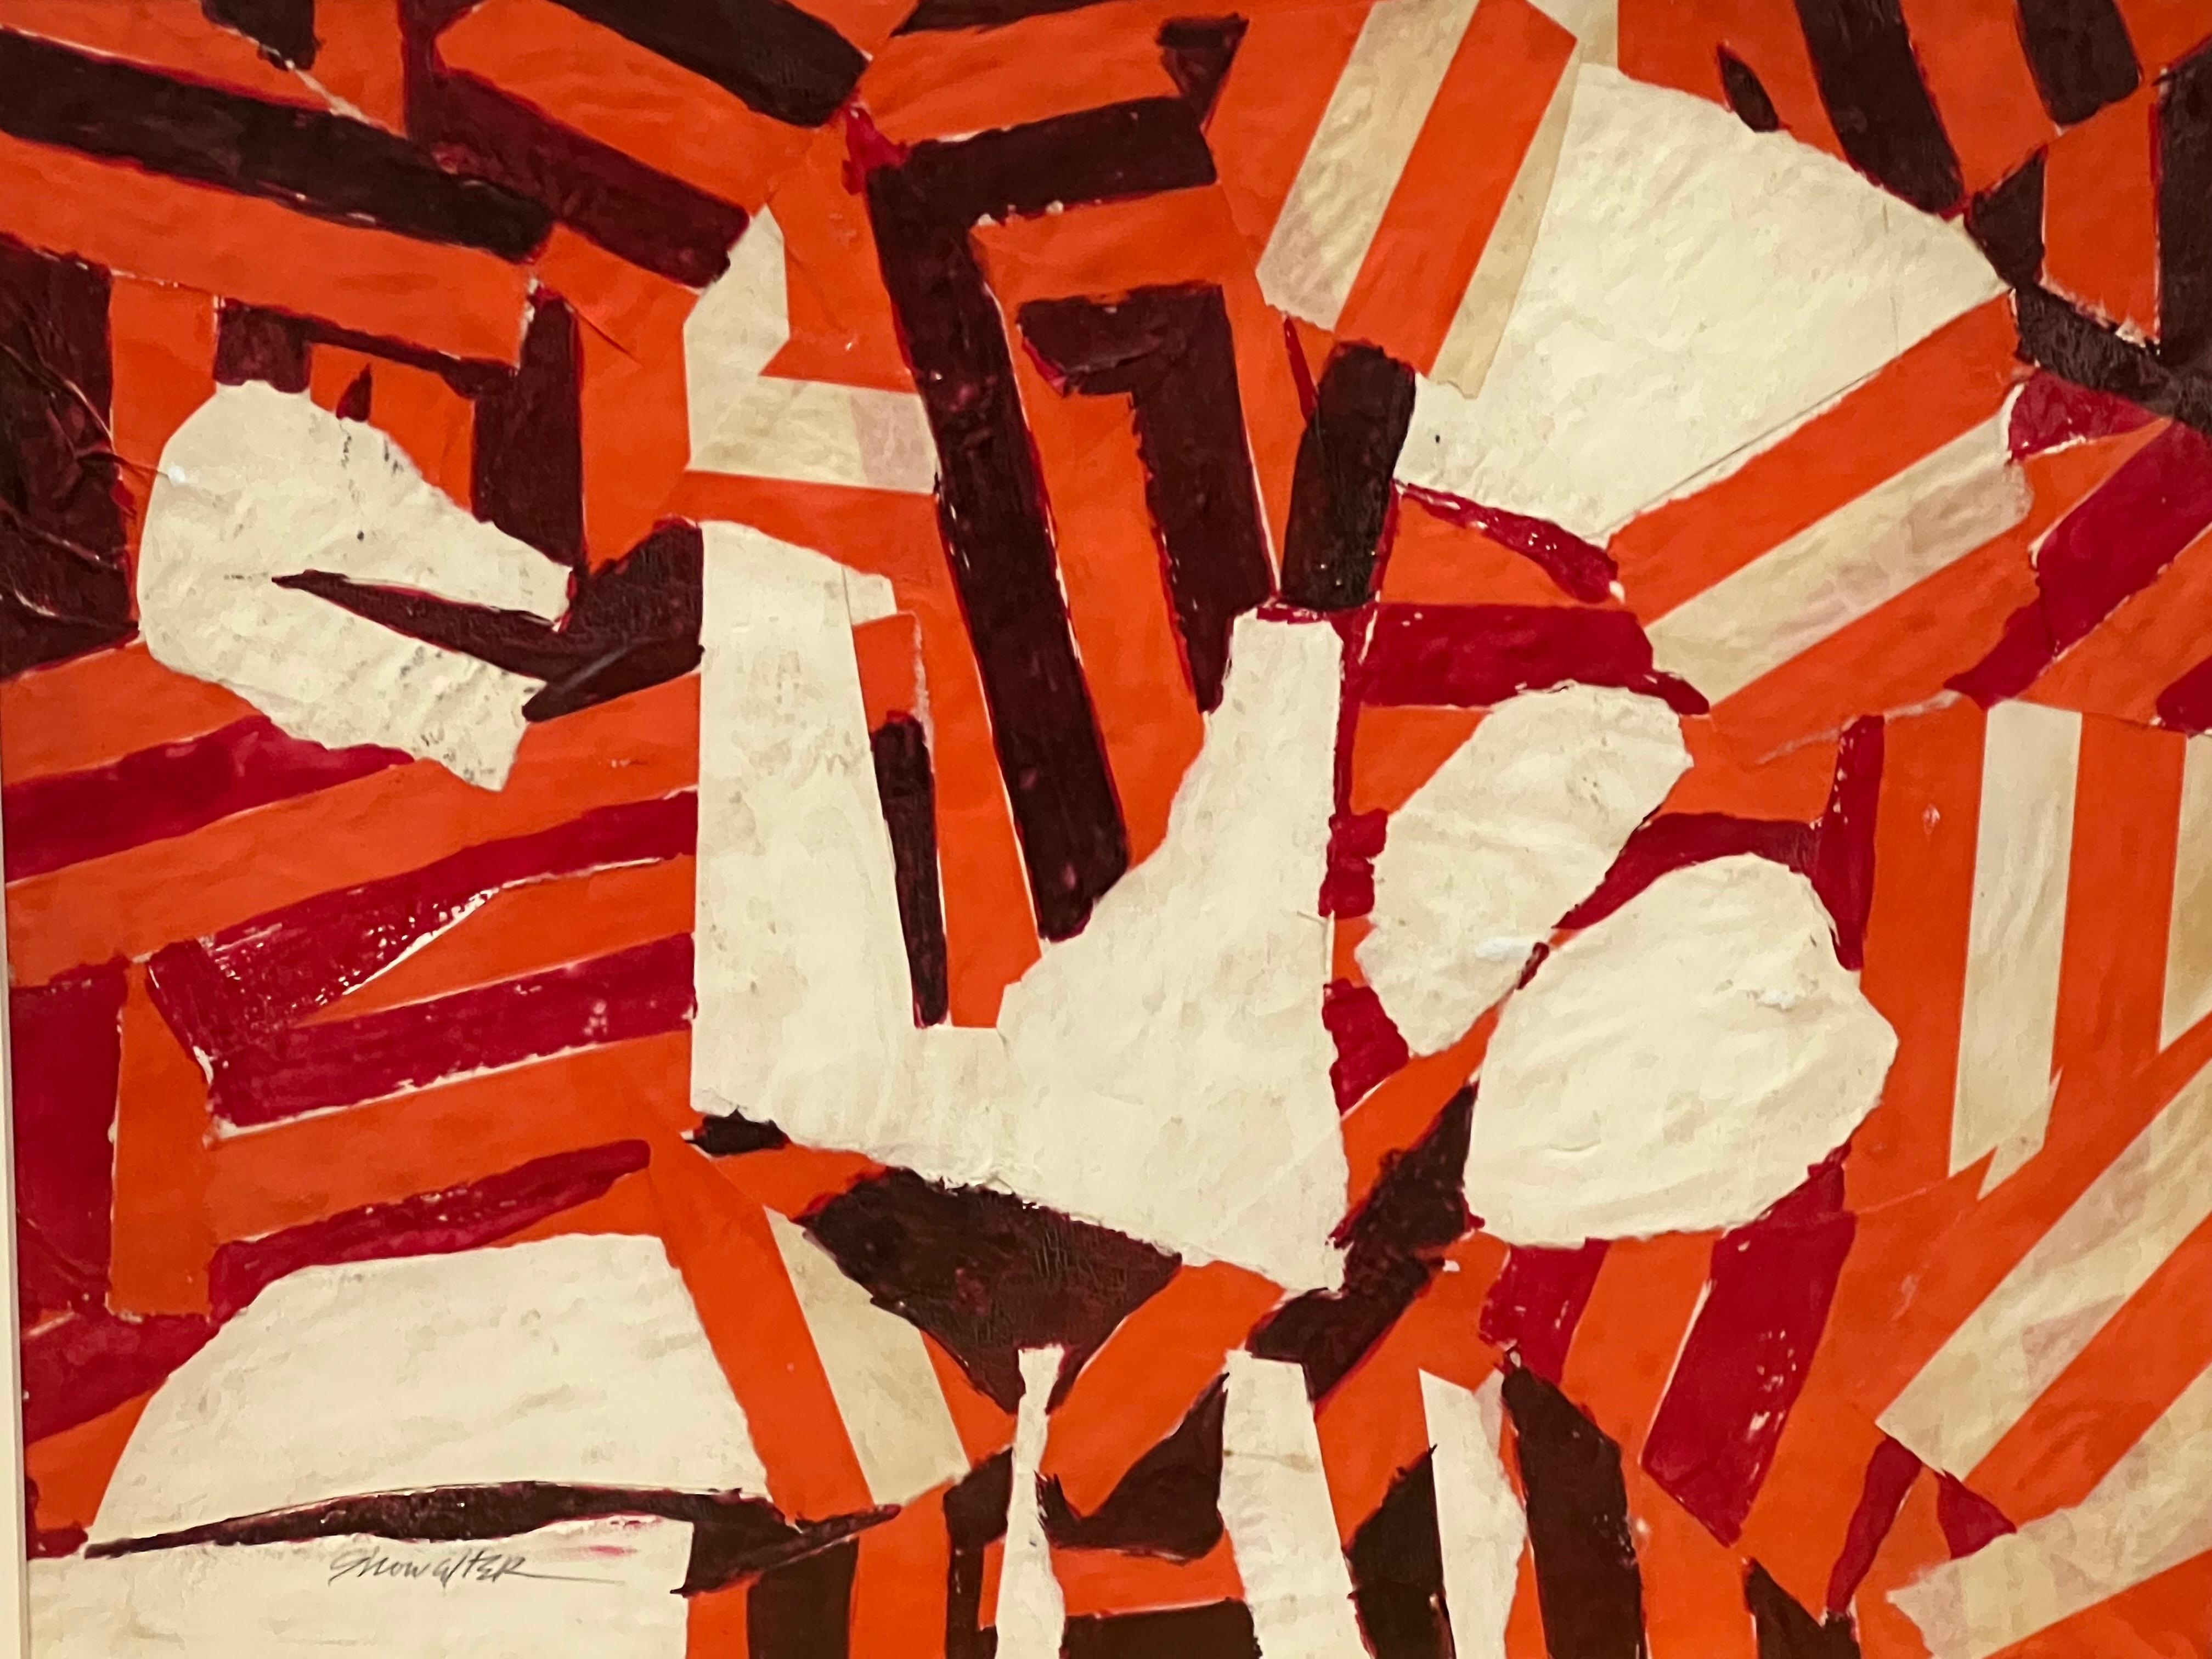 White, brown, red, and orange lines shape an abstract maze in this signed painting by Paul Showalter.

October 10, 1940 - May 24, 2019 
Artist, Designer, Painter, Poet, Sculptor Paul Showalter was born in Pasadena, California in 1940. Paul studied